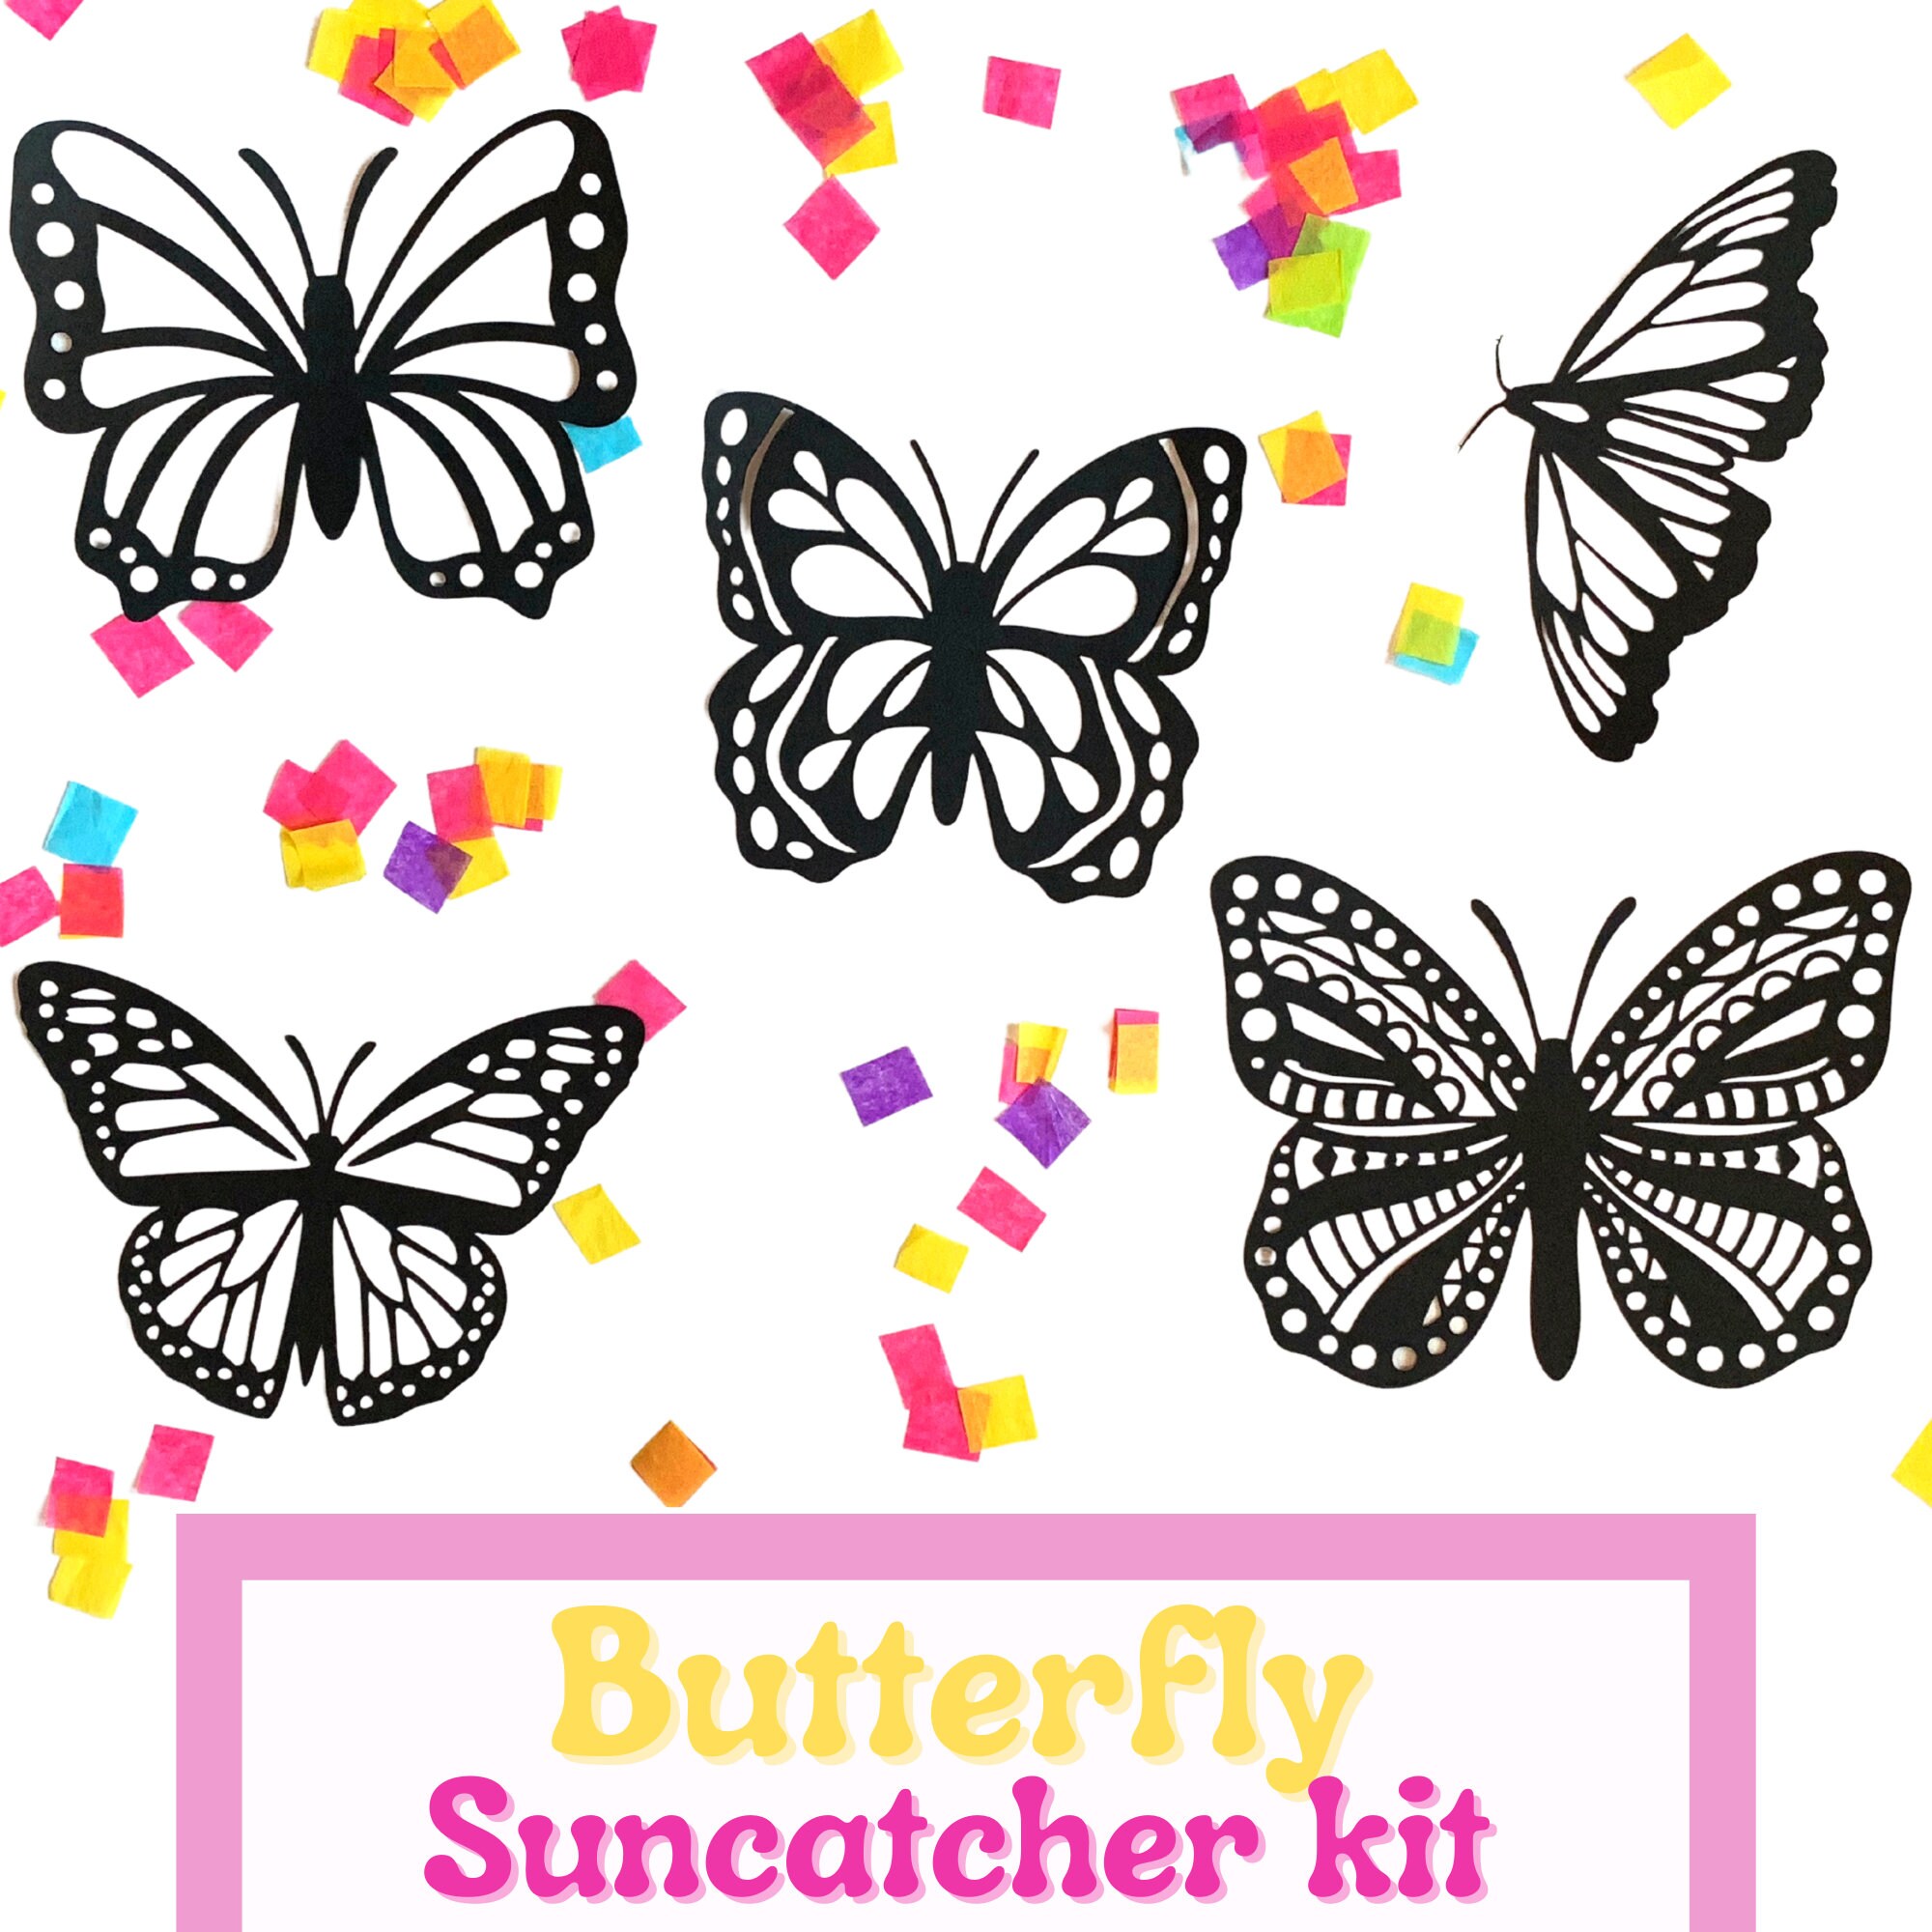 Butterfly Suncatcher DIY Craft Kit by Hello Sprout (pack of 8)